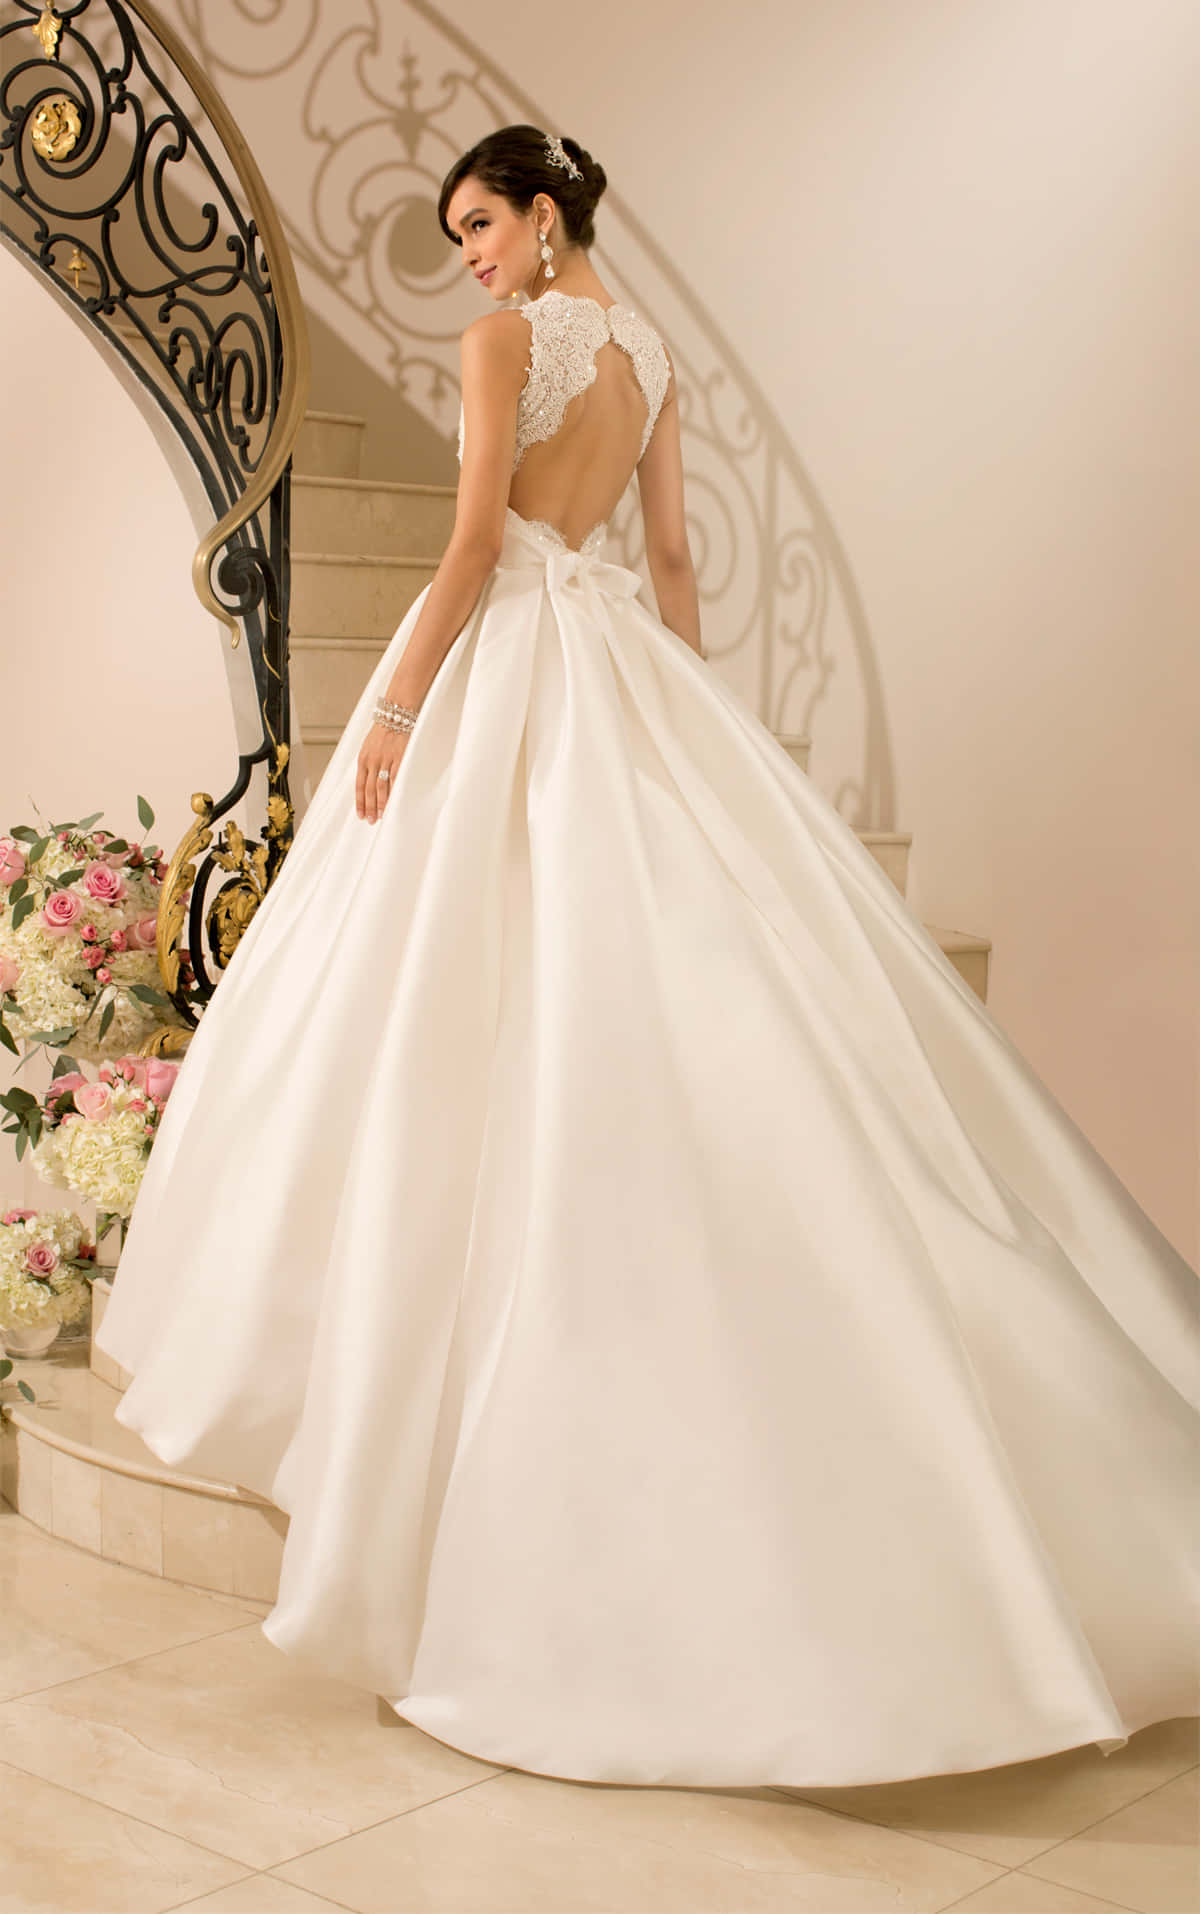 Beautiful wedding gown fit for a princess.